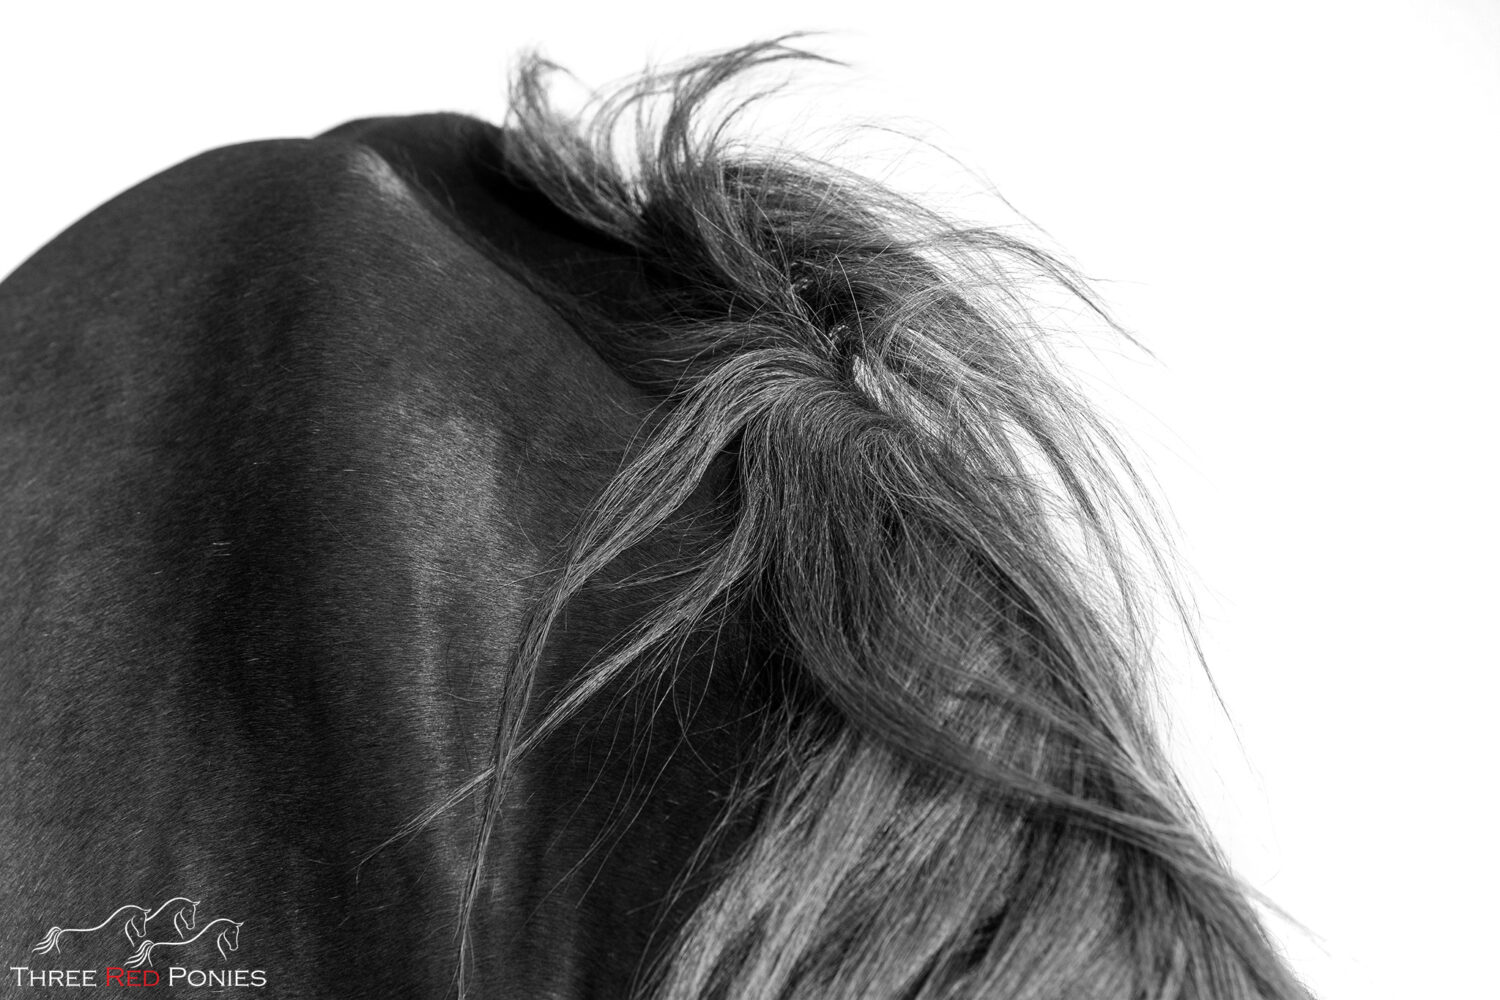 Fine Art black and white limited edition fine art horse prints by Three Red Ponies